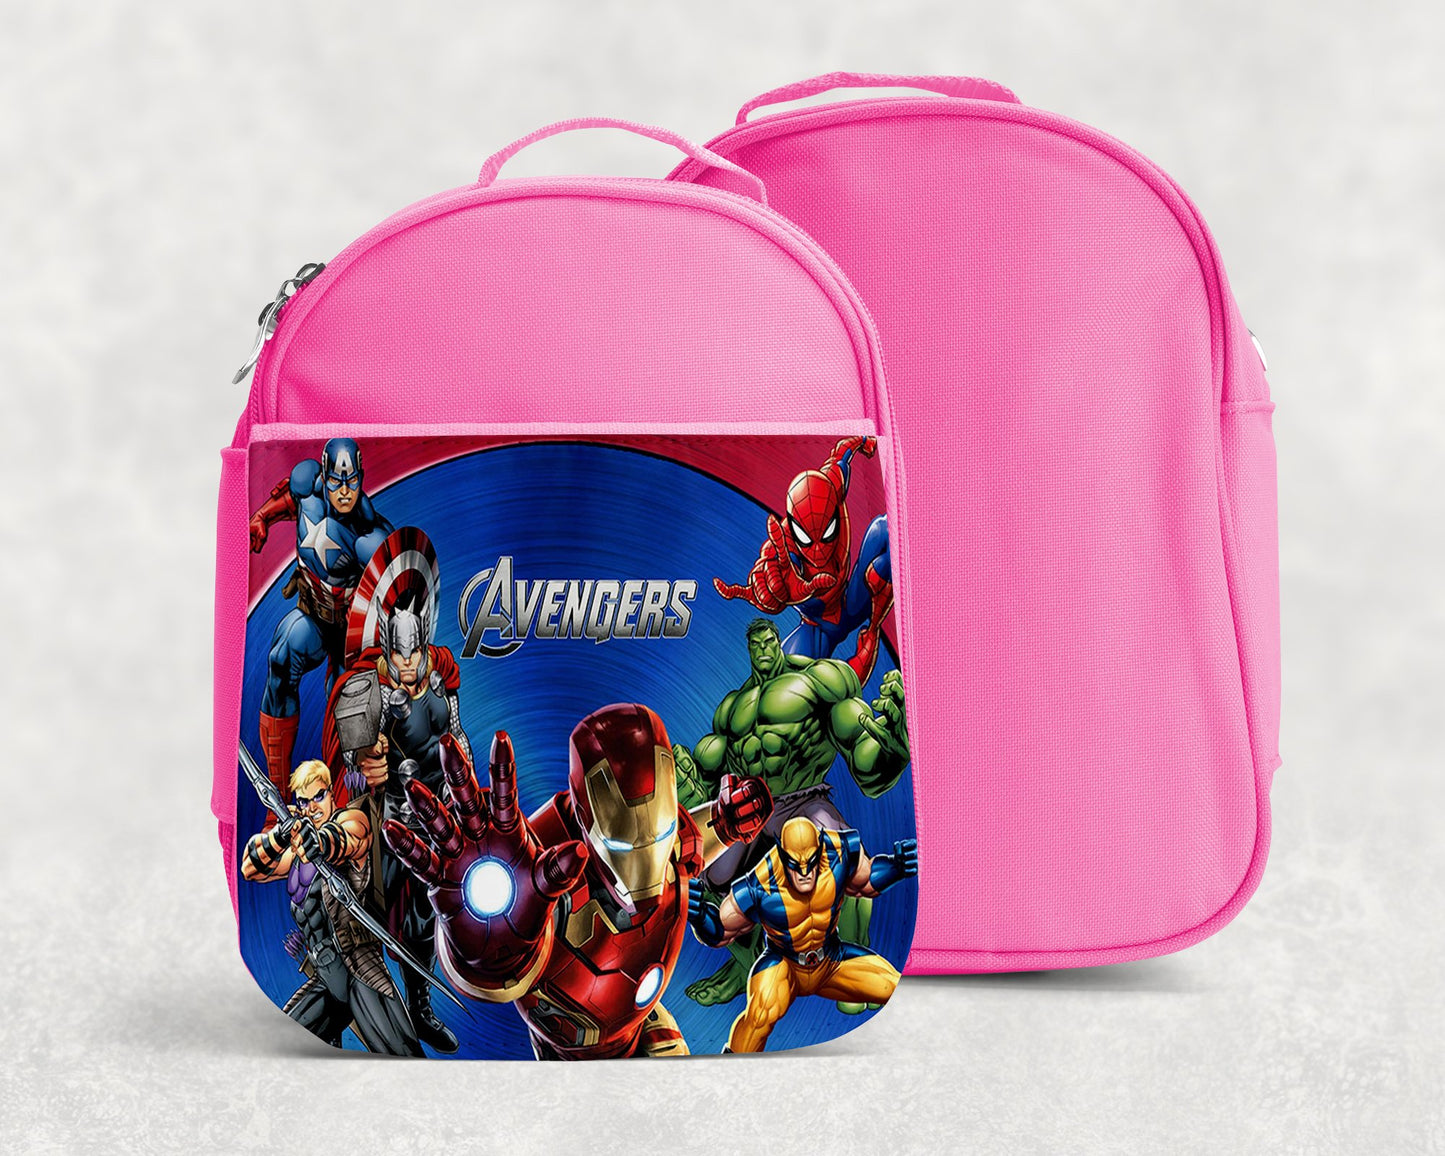 Avengers Lunch Tote